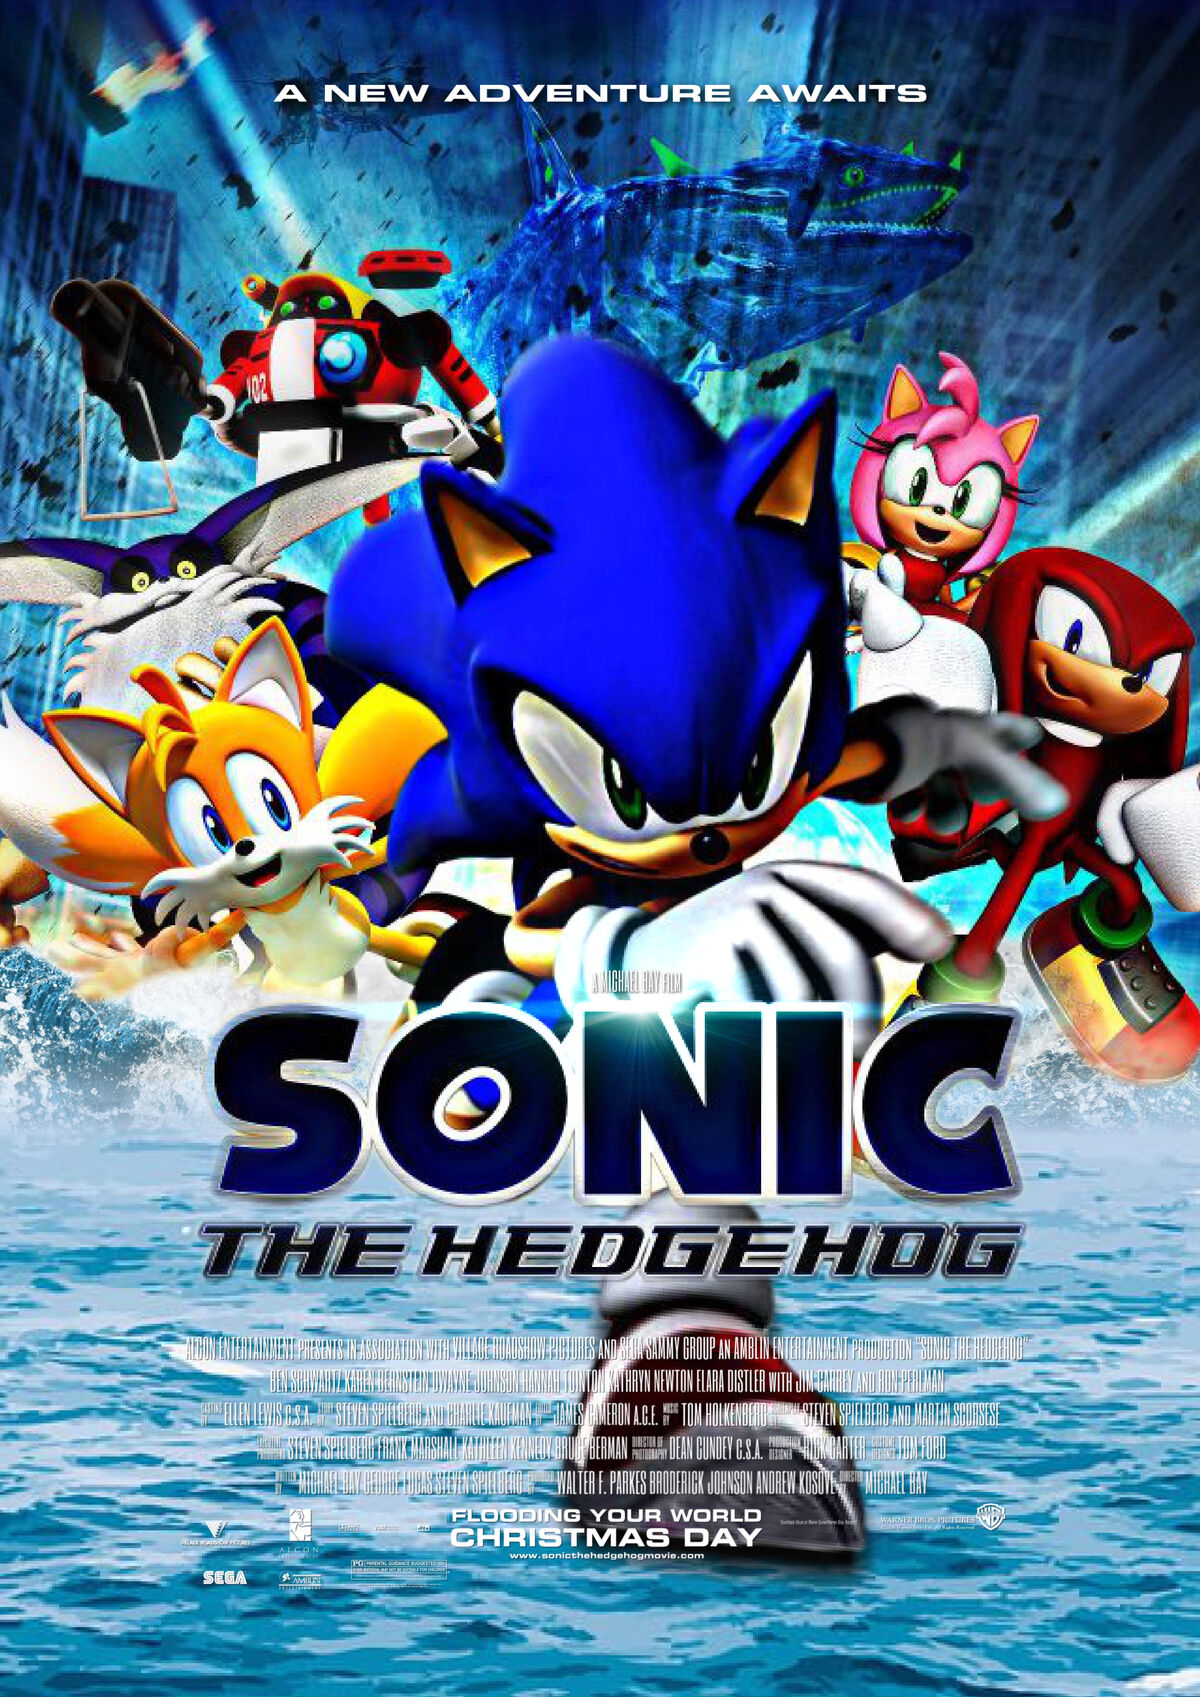 Sonic the Hedgehog 2: First Reviews Praise Action, Criticize Runtime